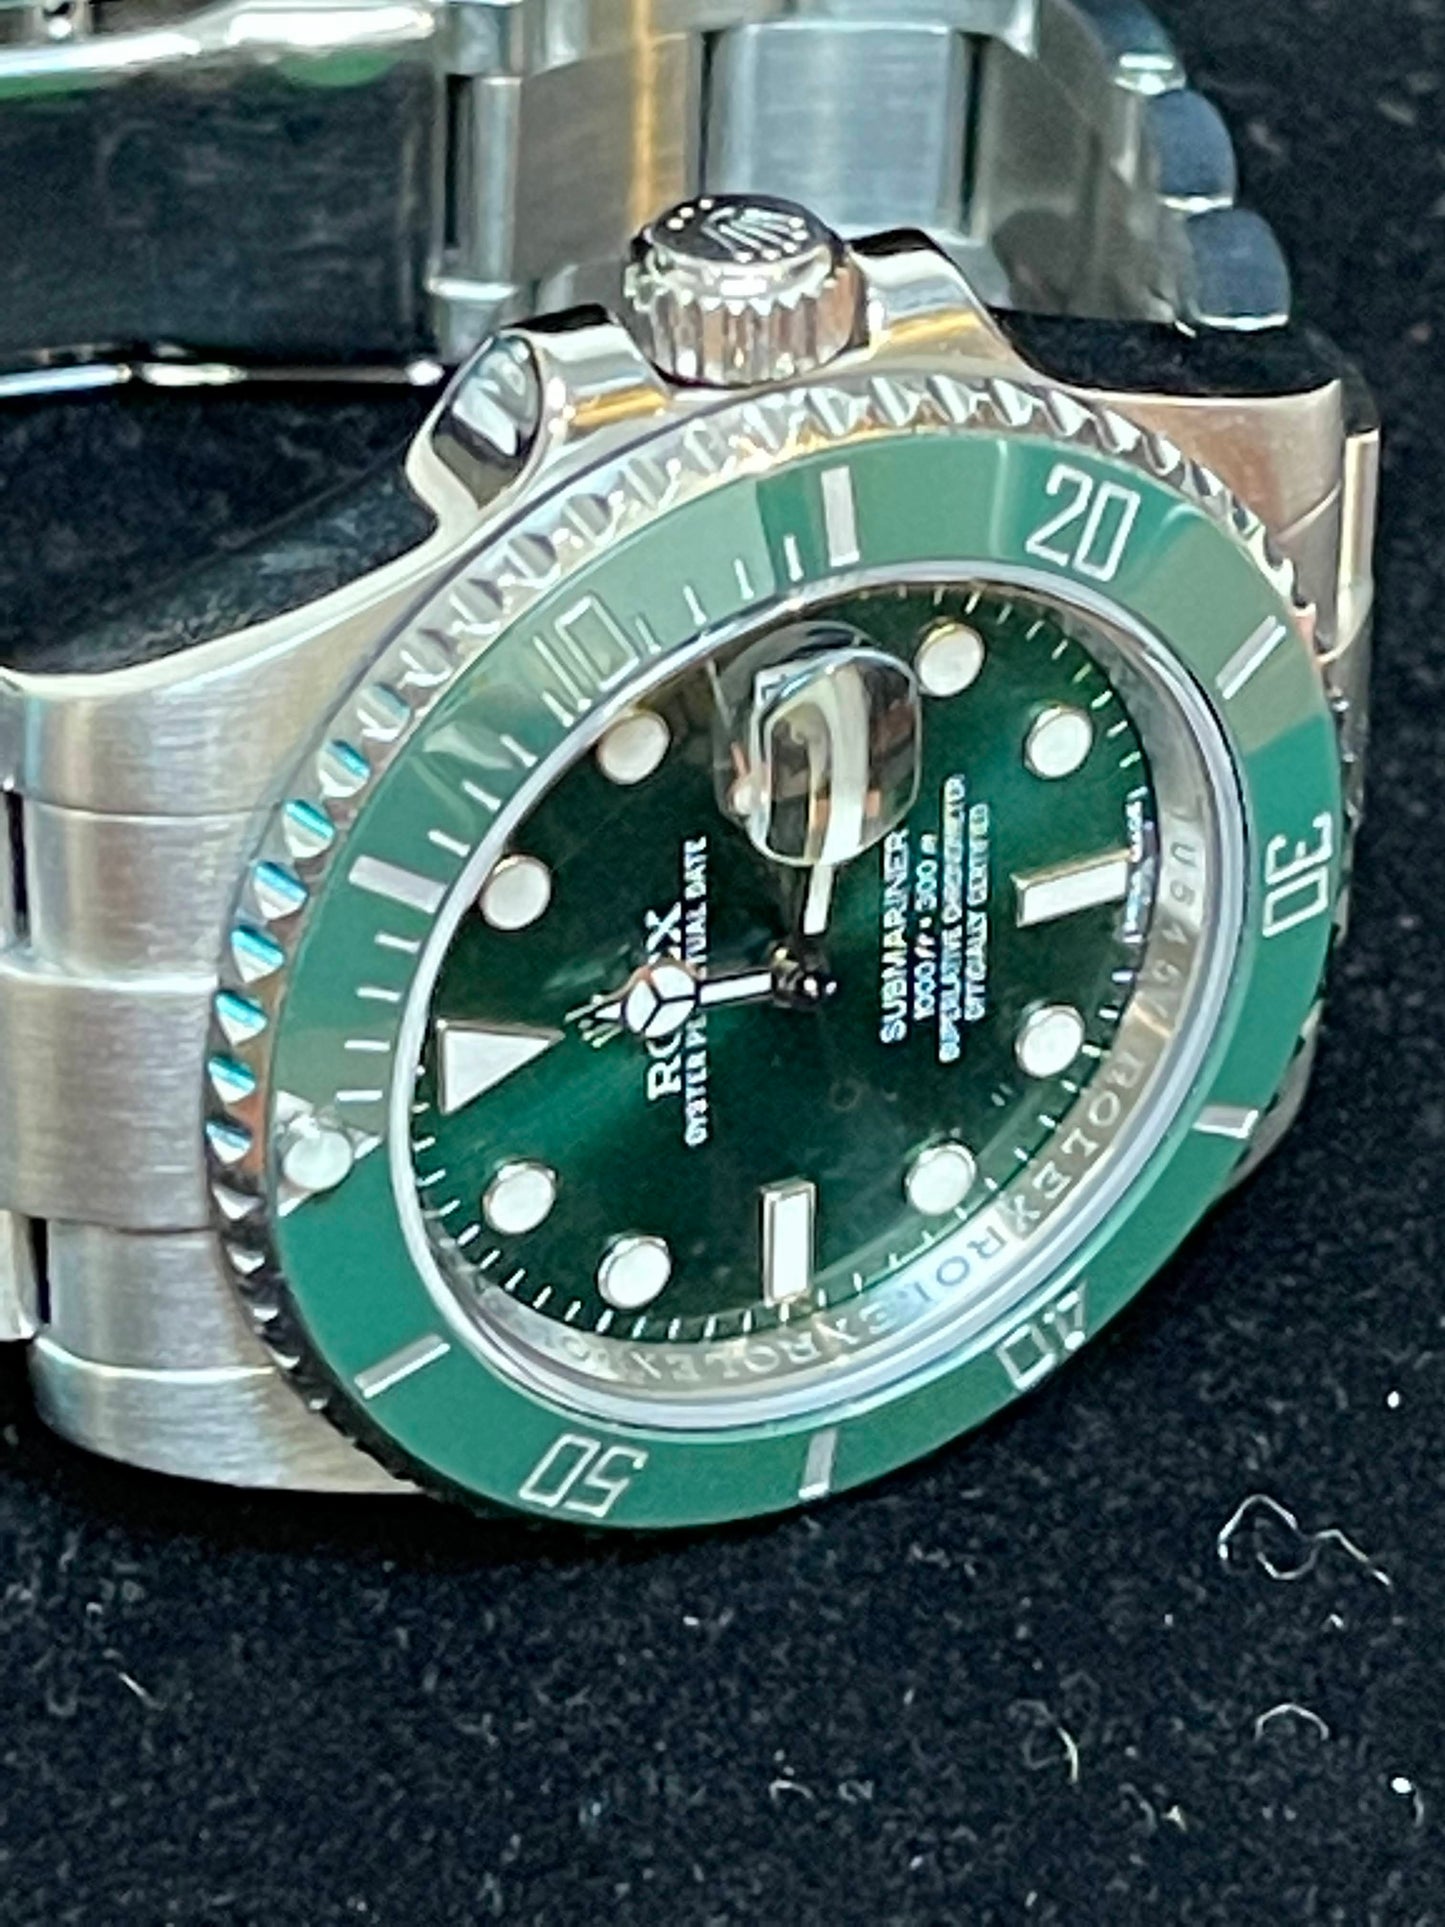 2016 Rolex Submariner 116610lv Hulk Green Dial Oyster Bracelet No Papers 40mm